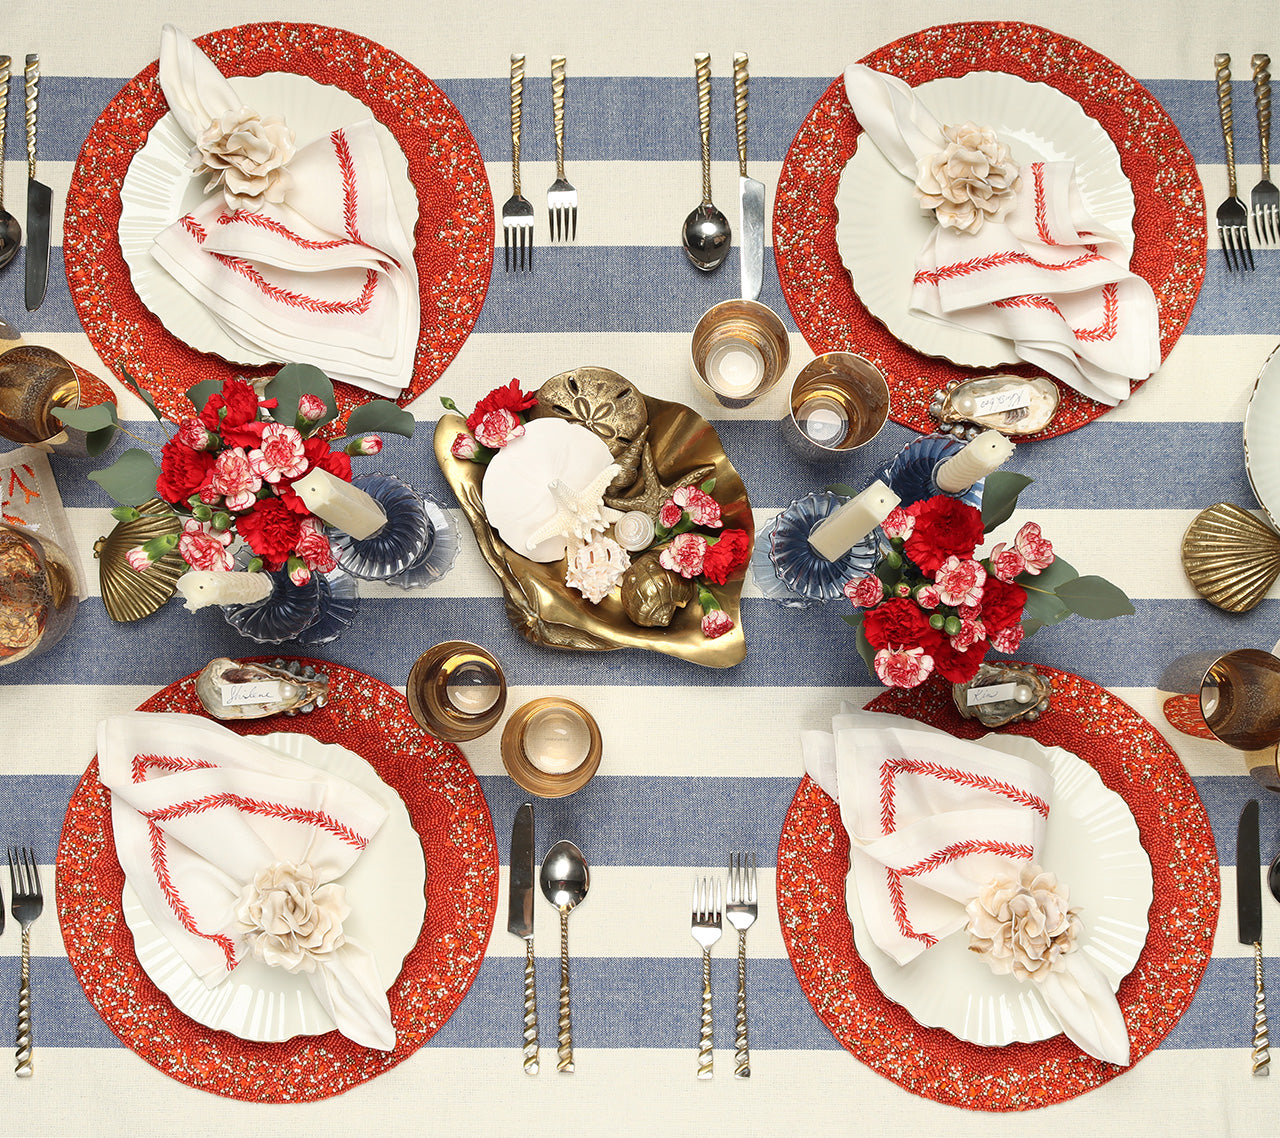 Four place settings with coral & gold beaded Maui Placemats, white plates, white napkins with a coral border on top of a blue & white stripe tablecloth